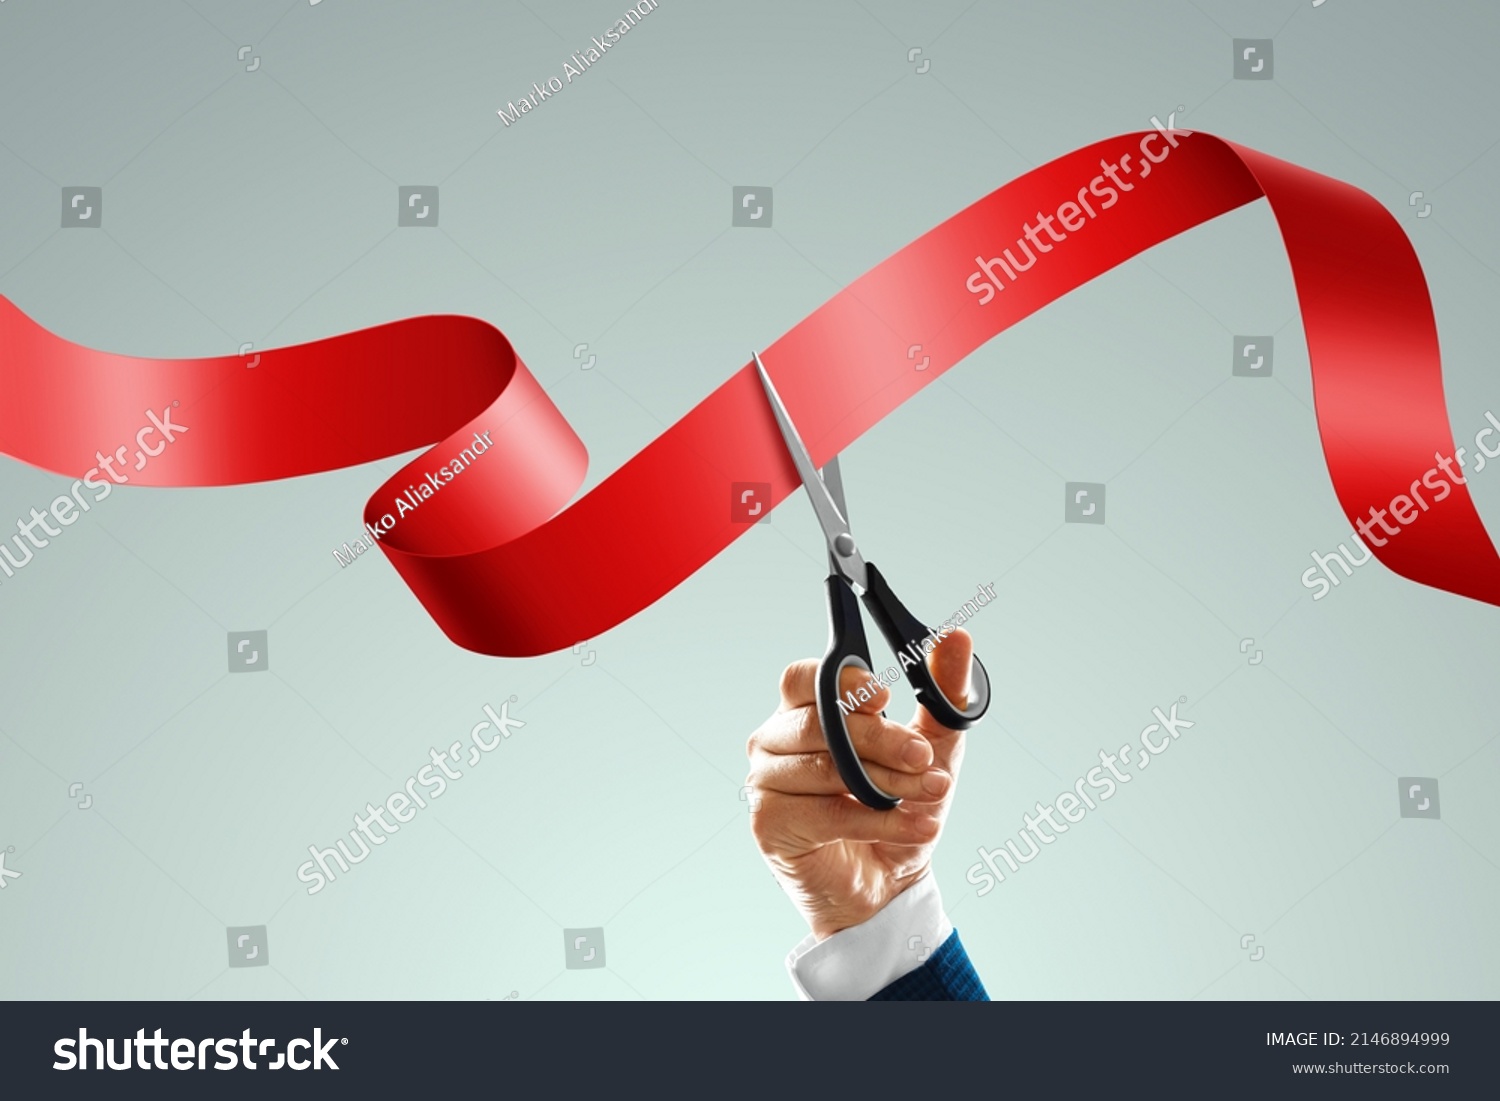 Grand opening with red ribbon and scissors. A businessman's hand holds scissors cuts a red ribbon on a light background. Close-up, copy space #2146894999